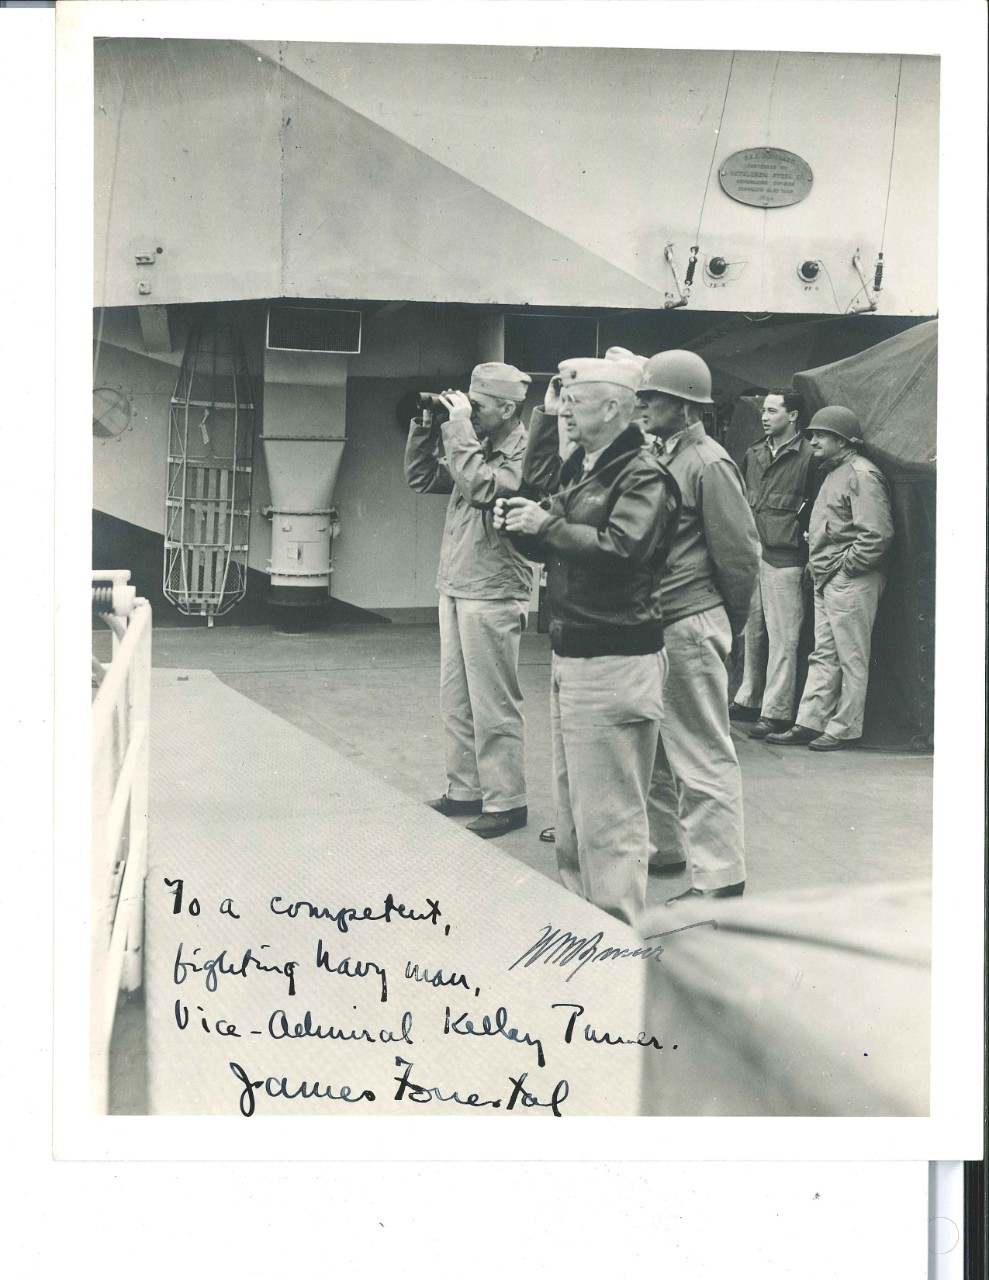 <p>Navy and Marine Corps leadership aboard USS Eldorado (AGC-11) during Iwo Jima campaign. Photo is signed by James Forrestal: &quot;To a competent, fighting Navy Man, Vice-Admiral Kelly Turner.&quot;</p>
